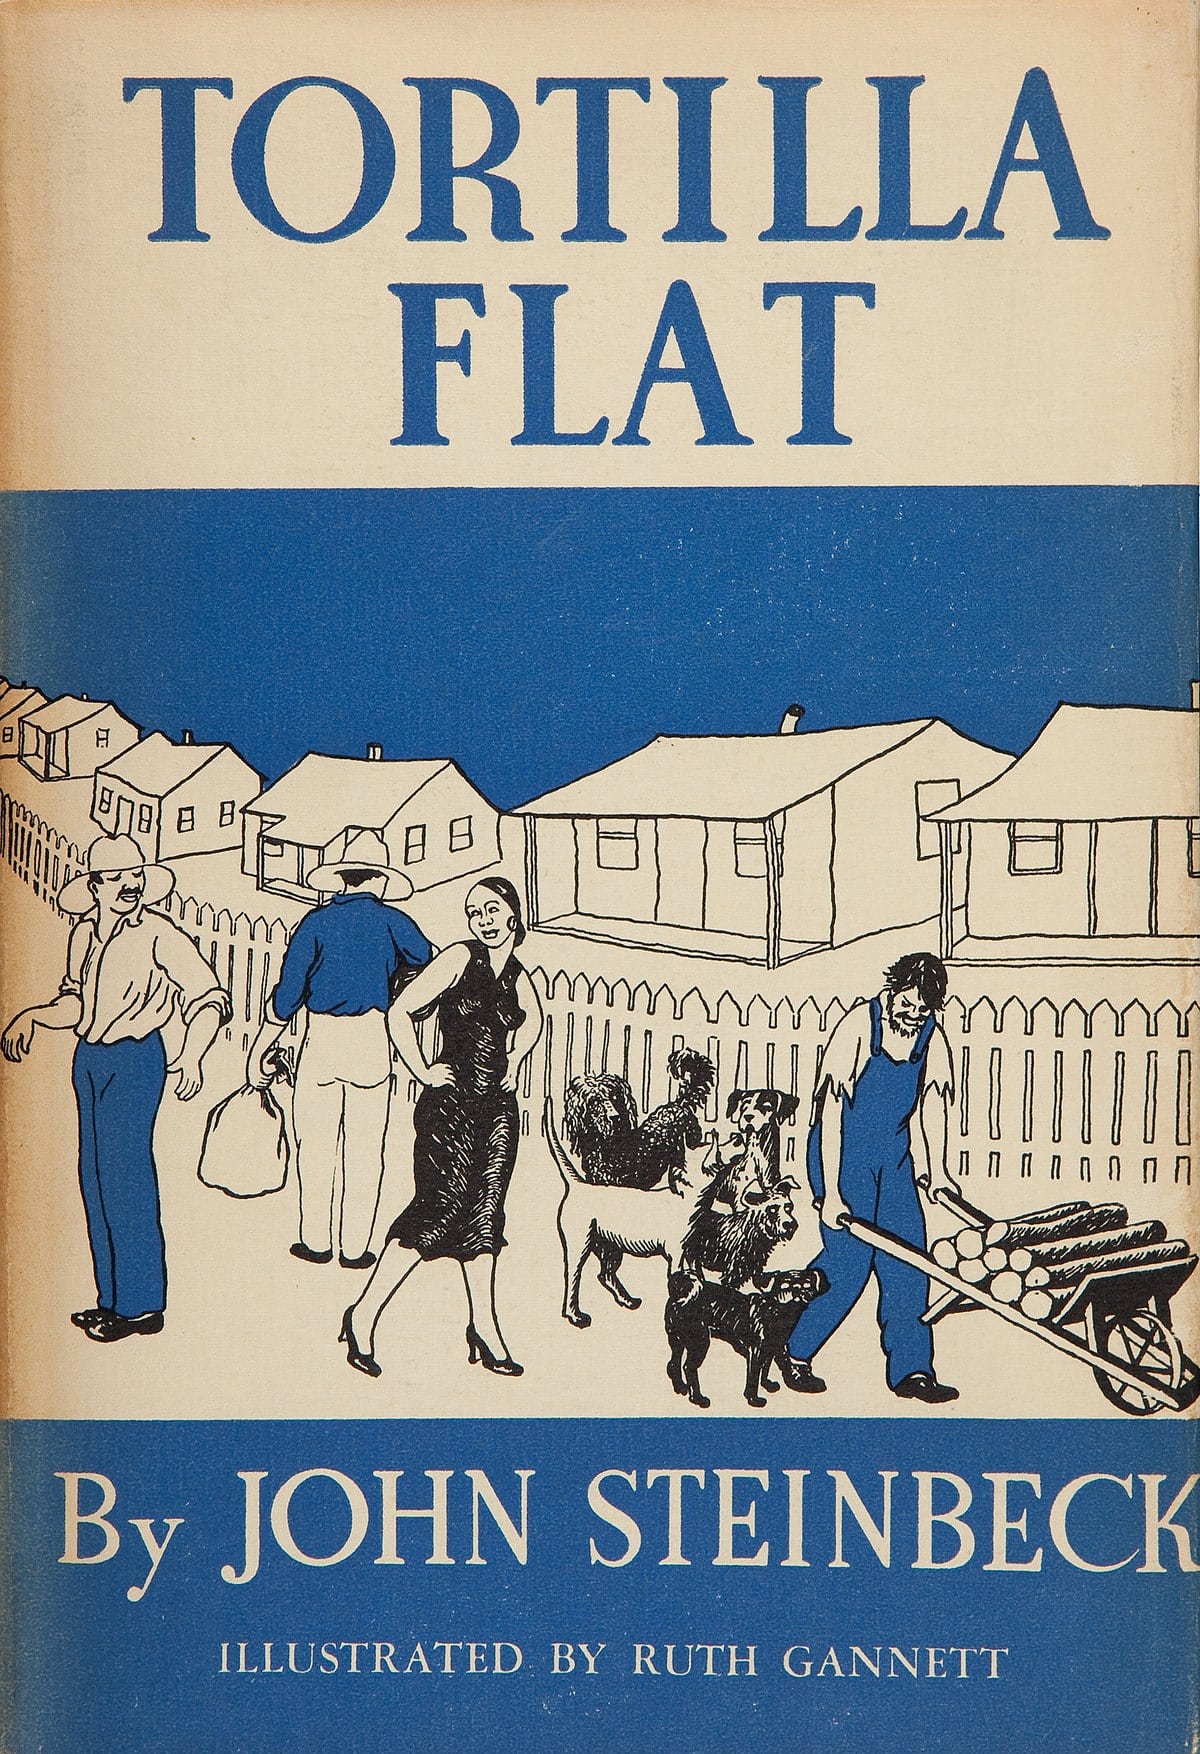 cover of first edition of Tortilla Flat, illustrated by Ruth Gannett